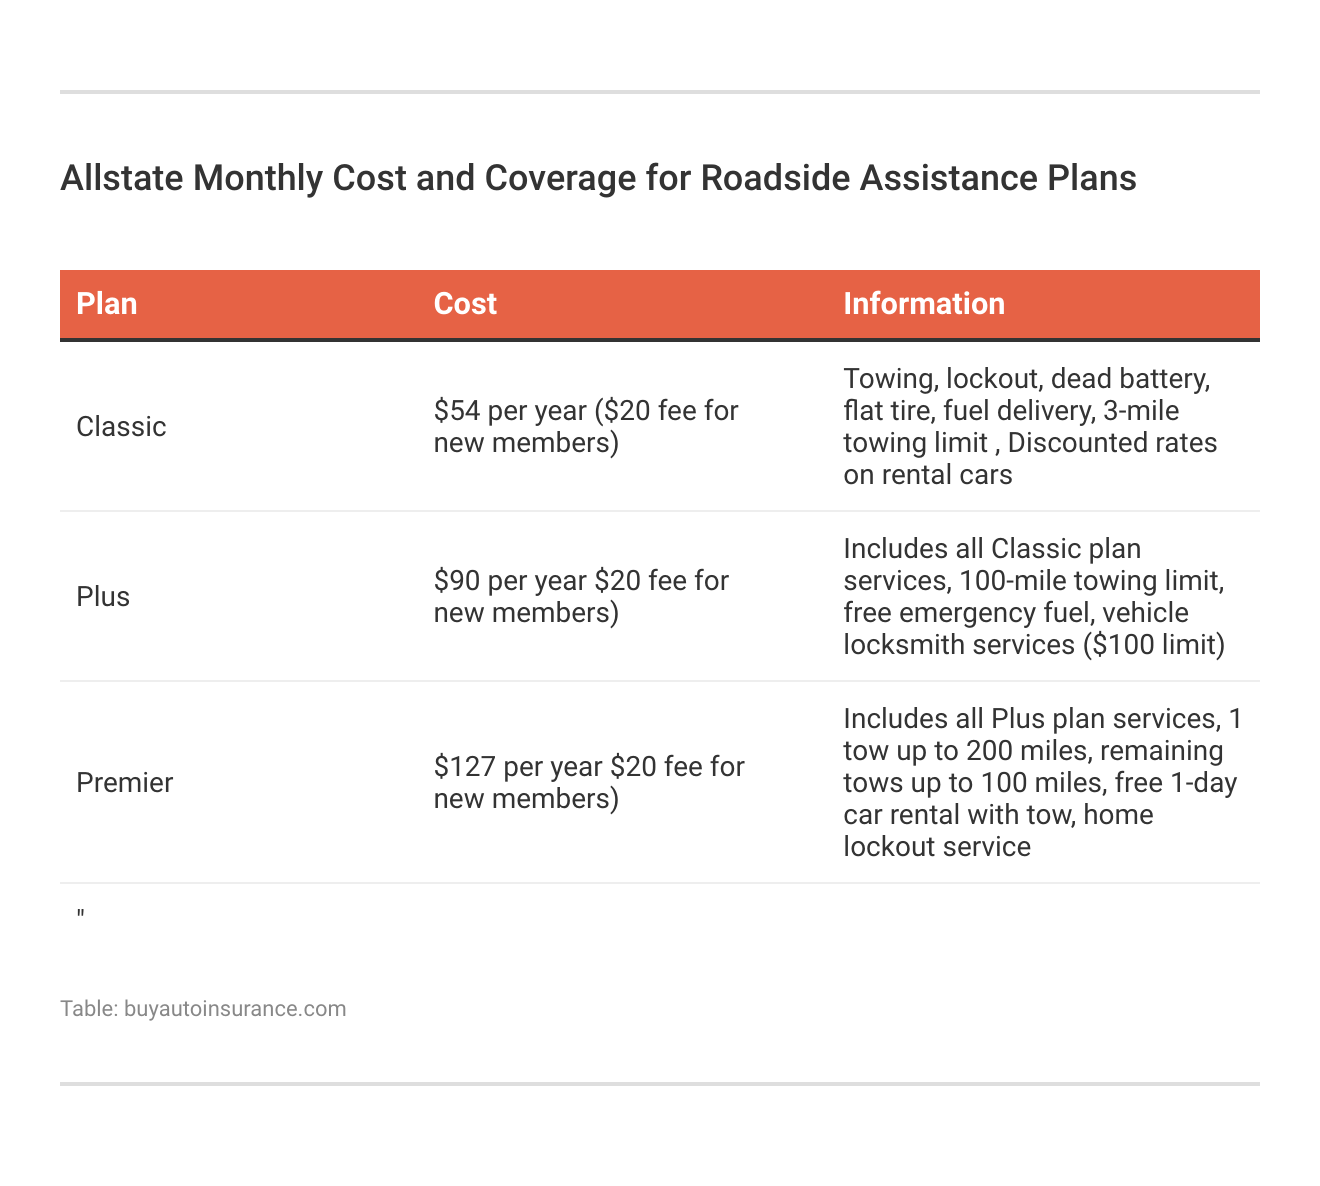 <h3>Allstate Monthly Cost and Coverage for Roadside Assistance Plans</h3>